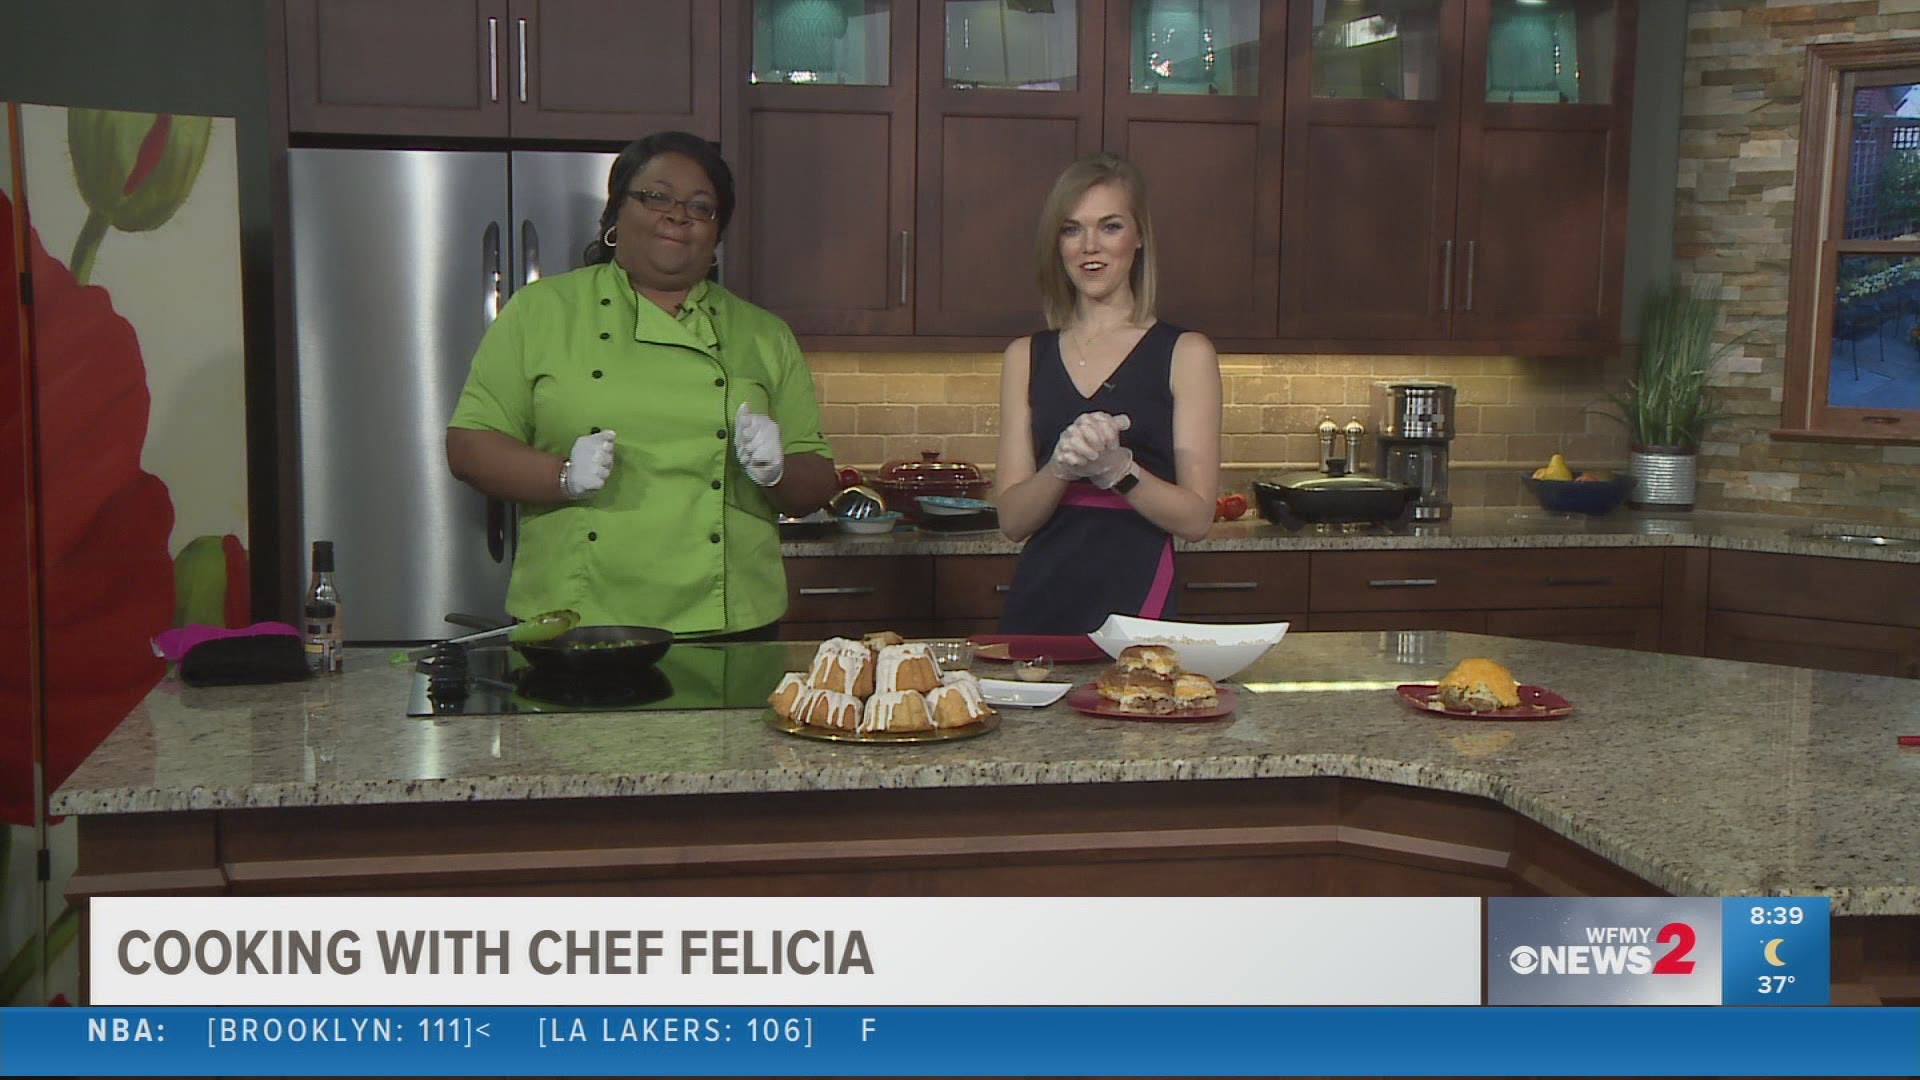 She joins us back in the News 2 kitchen teaching us to rework leftovers from the week